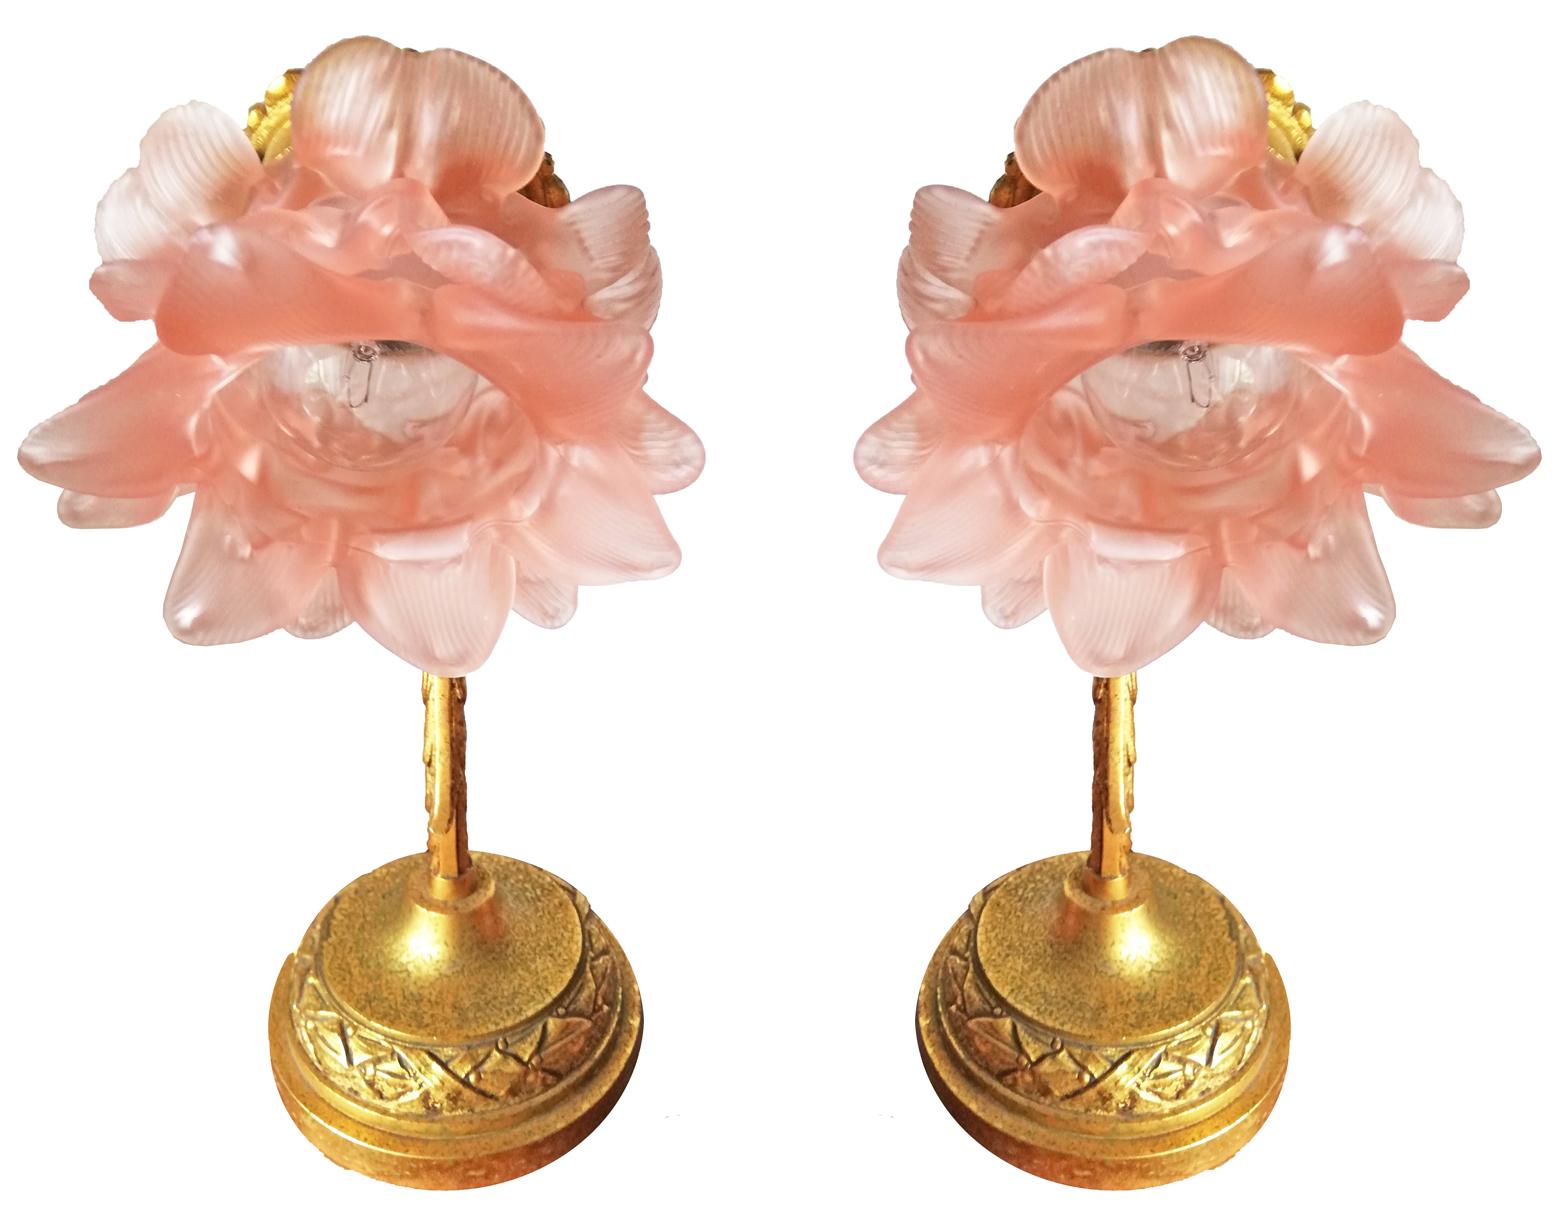 Pair of antique ornate French Art Nouveau/deco frosted satin art glass petal flower lamp shade Table lamps
Measures:
Diameter 8 in/ 20 cm
Height 12 in / 30 cm
Weight: 4Kg / 5 lb
Age patina
Four-light bulbs E27 good working condition/European